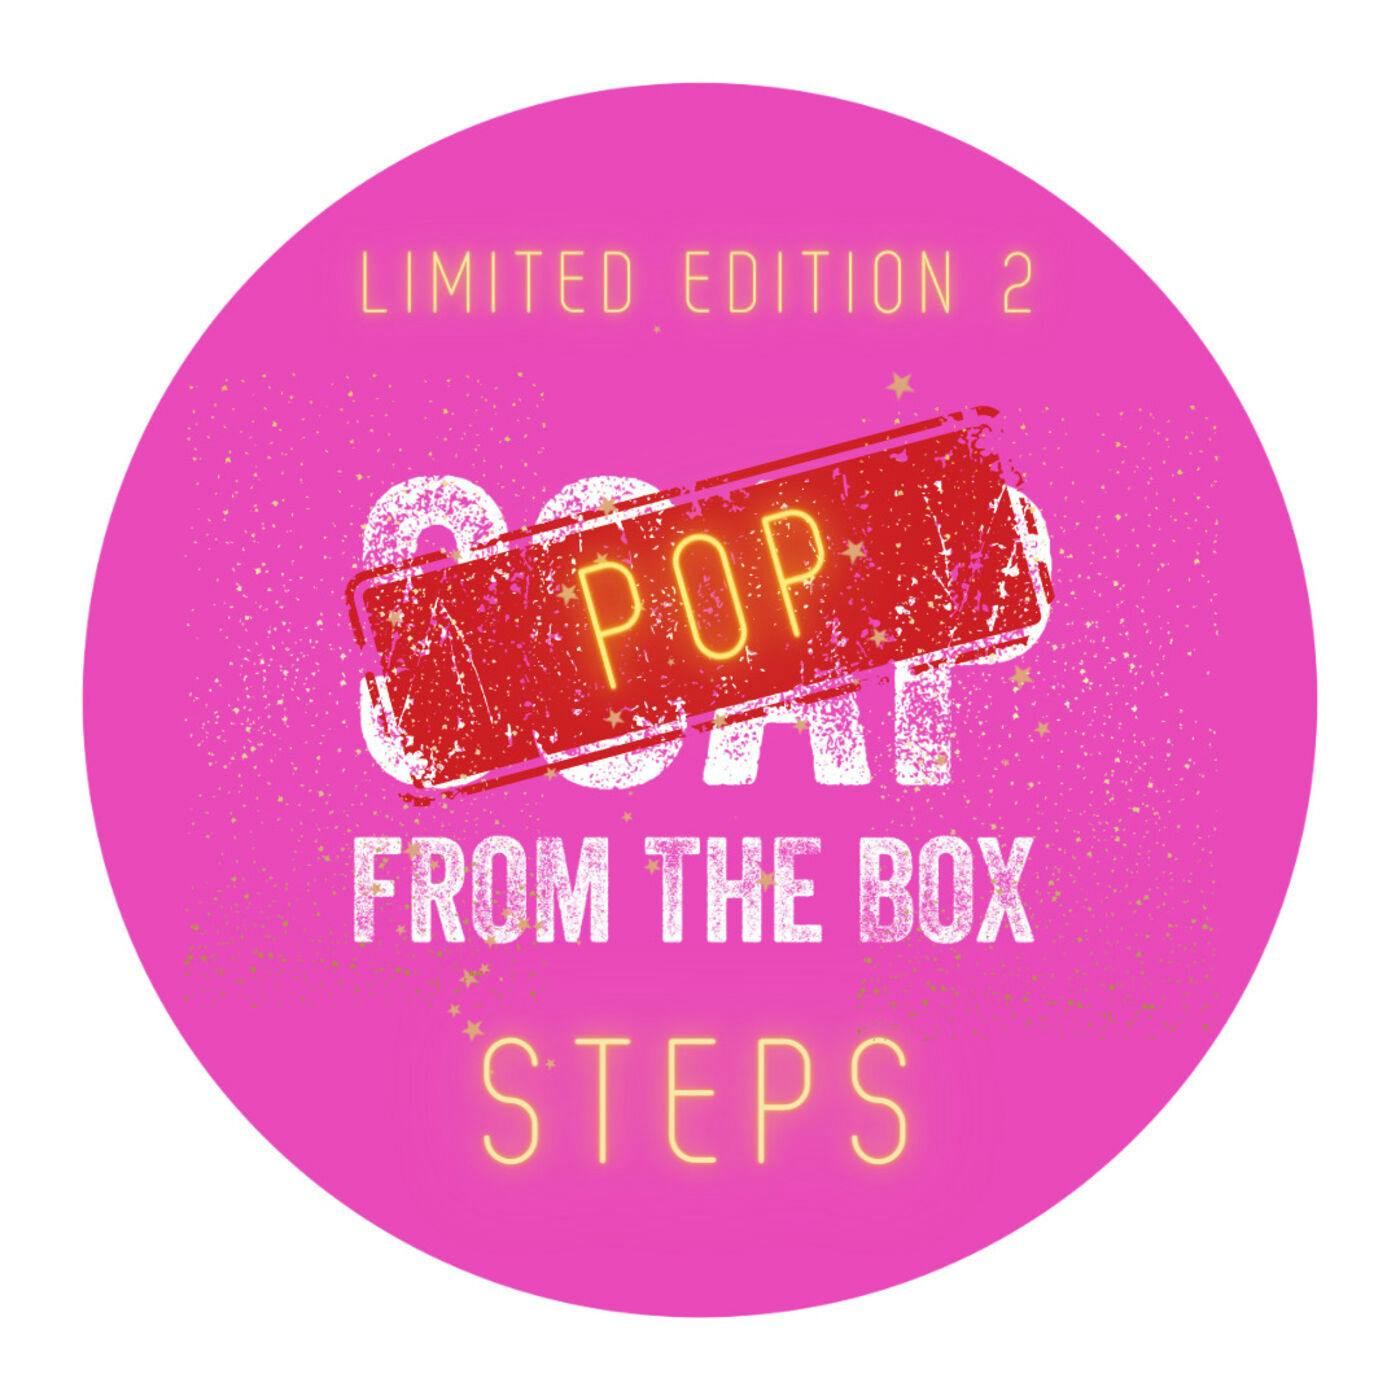 CLAIRE RICHARDS (Pop From The Box Ep 2)